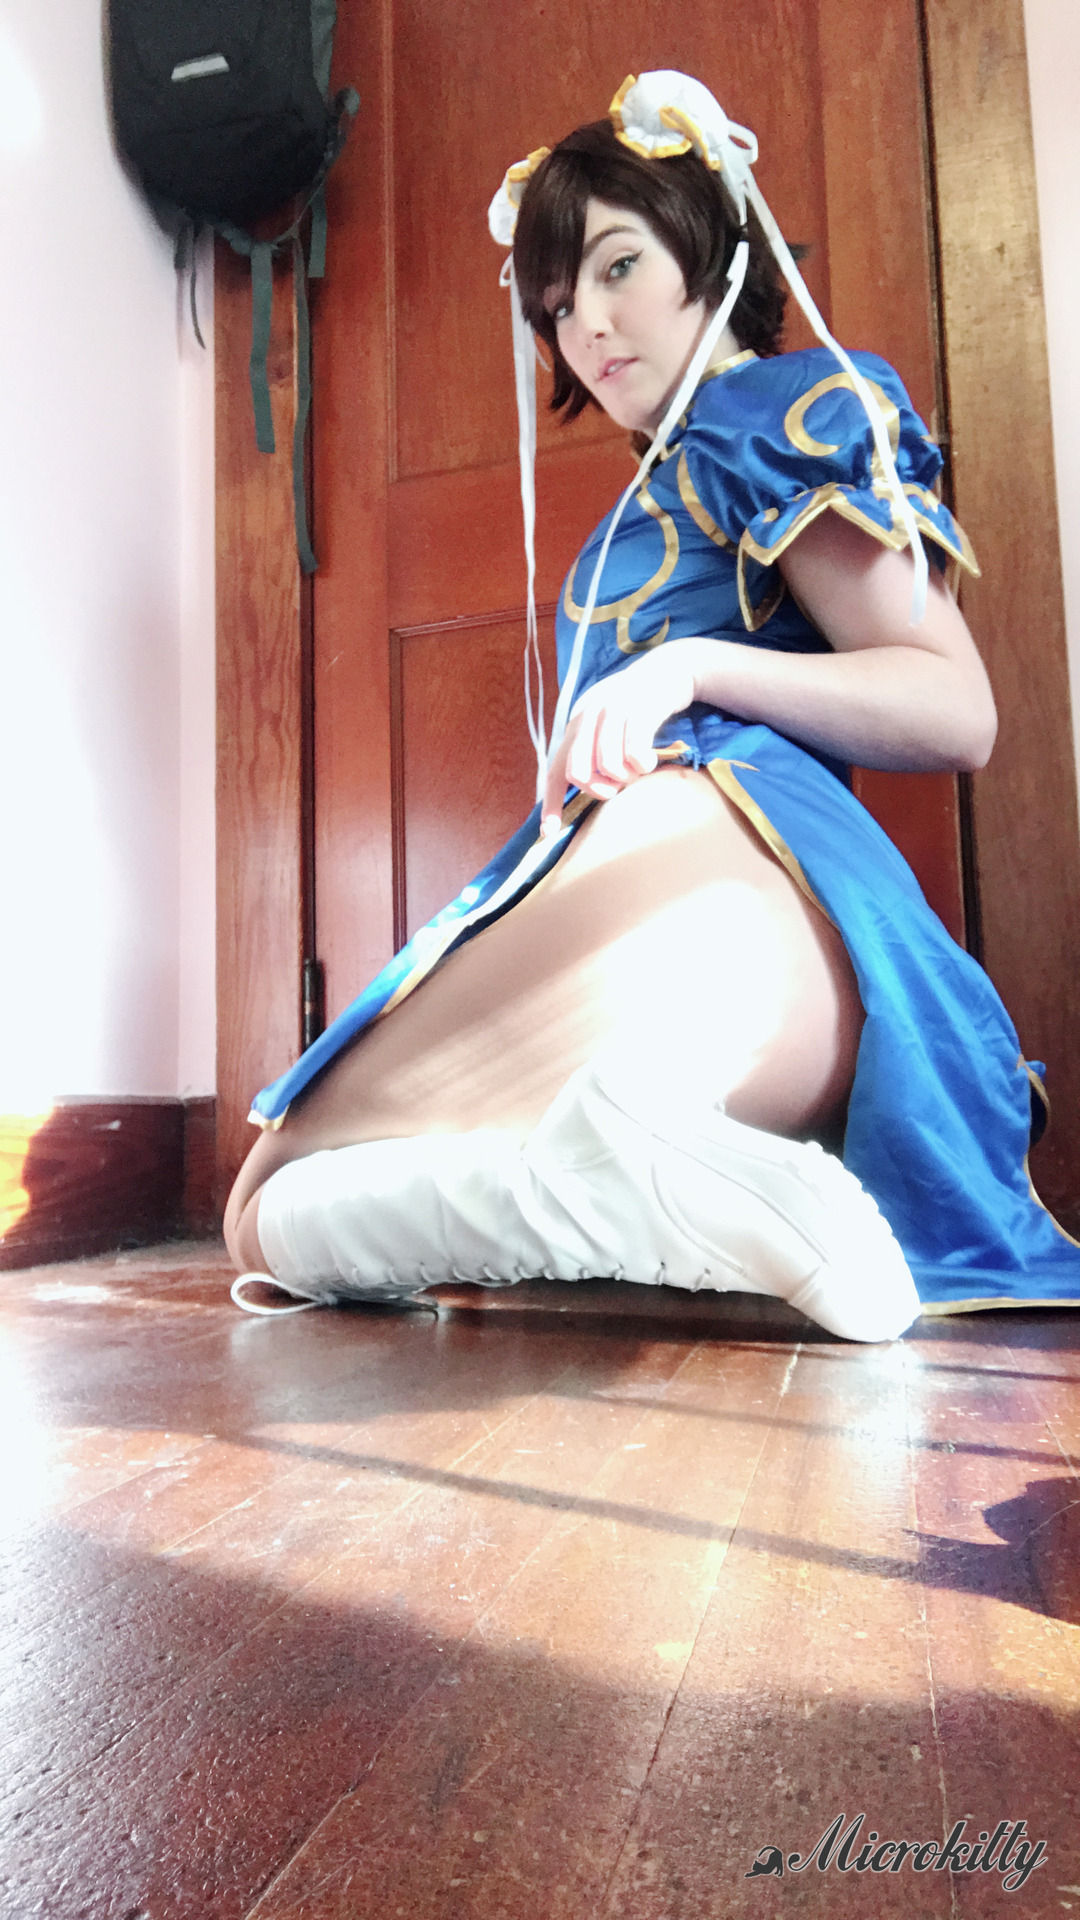 got the chun li cell set to everyone (if I missed you, shoot me a message on manyvids!) so